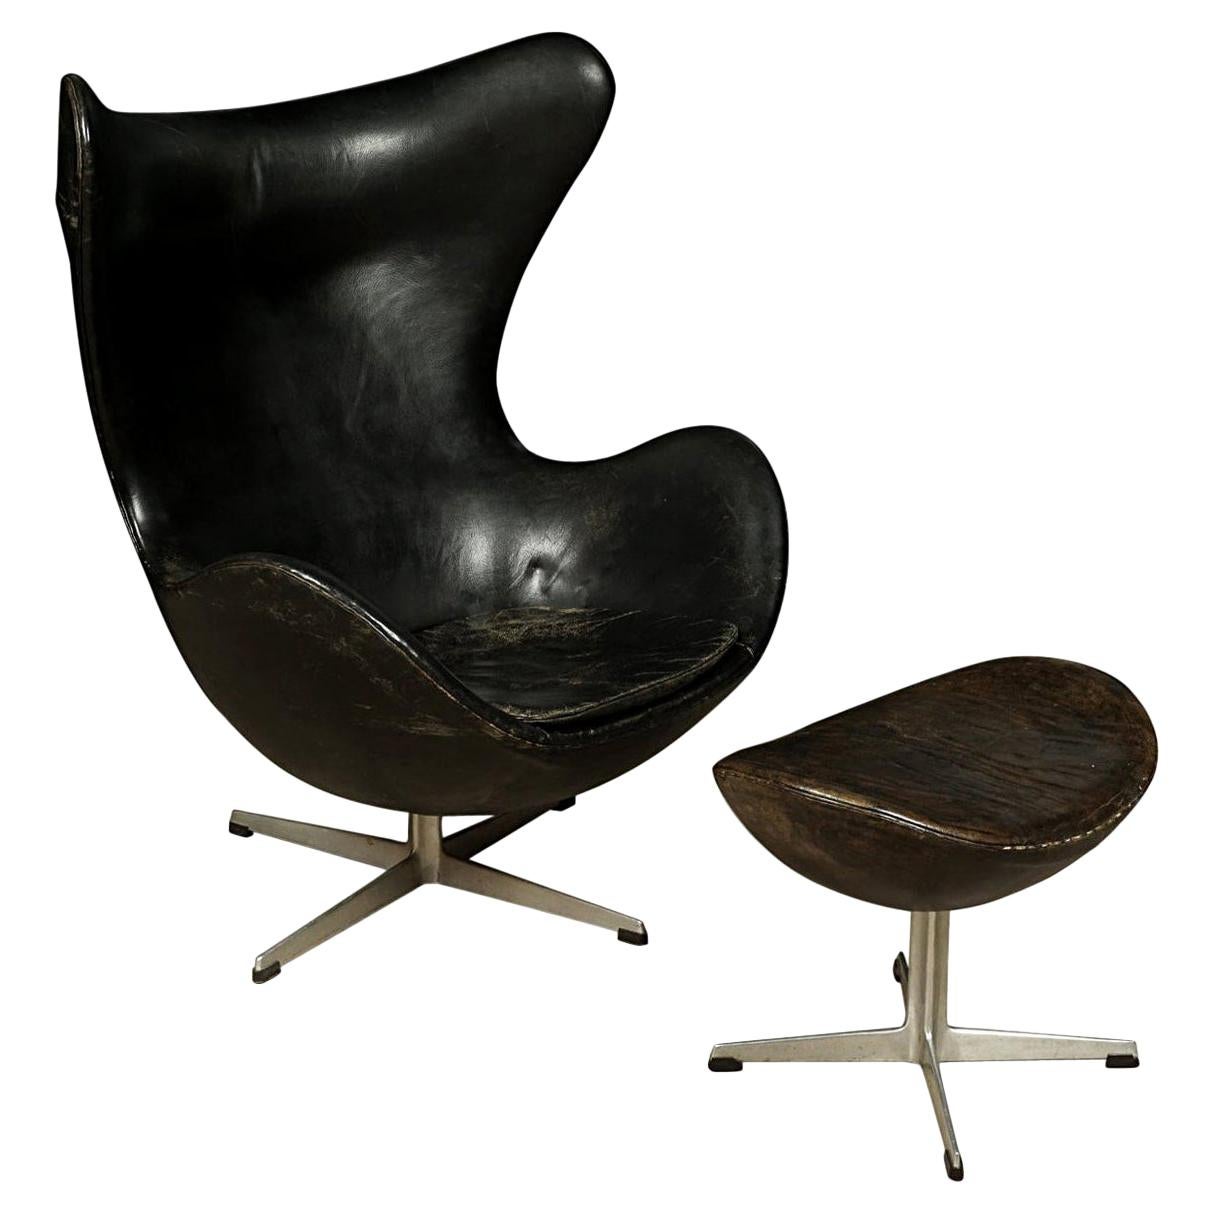 Vintage Arne Jacobsen "The Egg" Chair in Original Leather, with Ottoman,  1963 at 1stDibs | arne jacobsen the egg